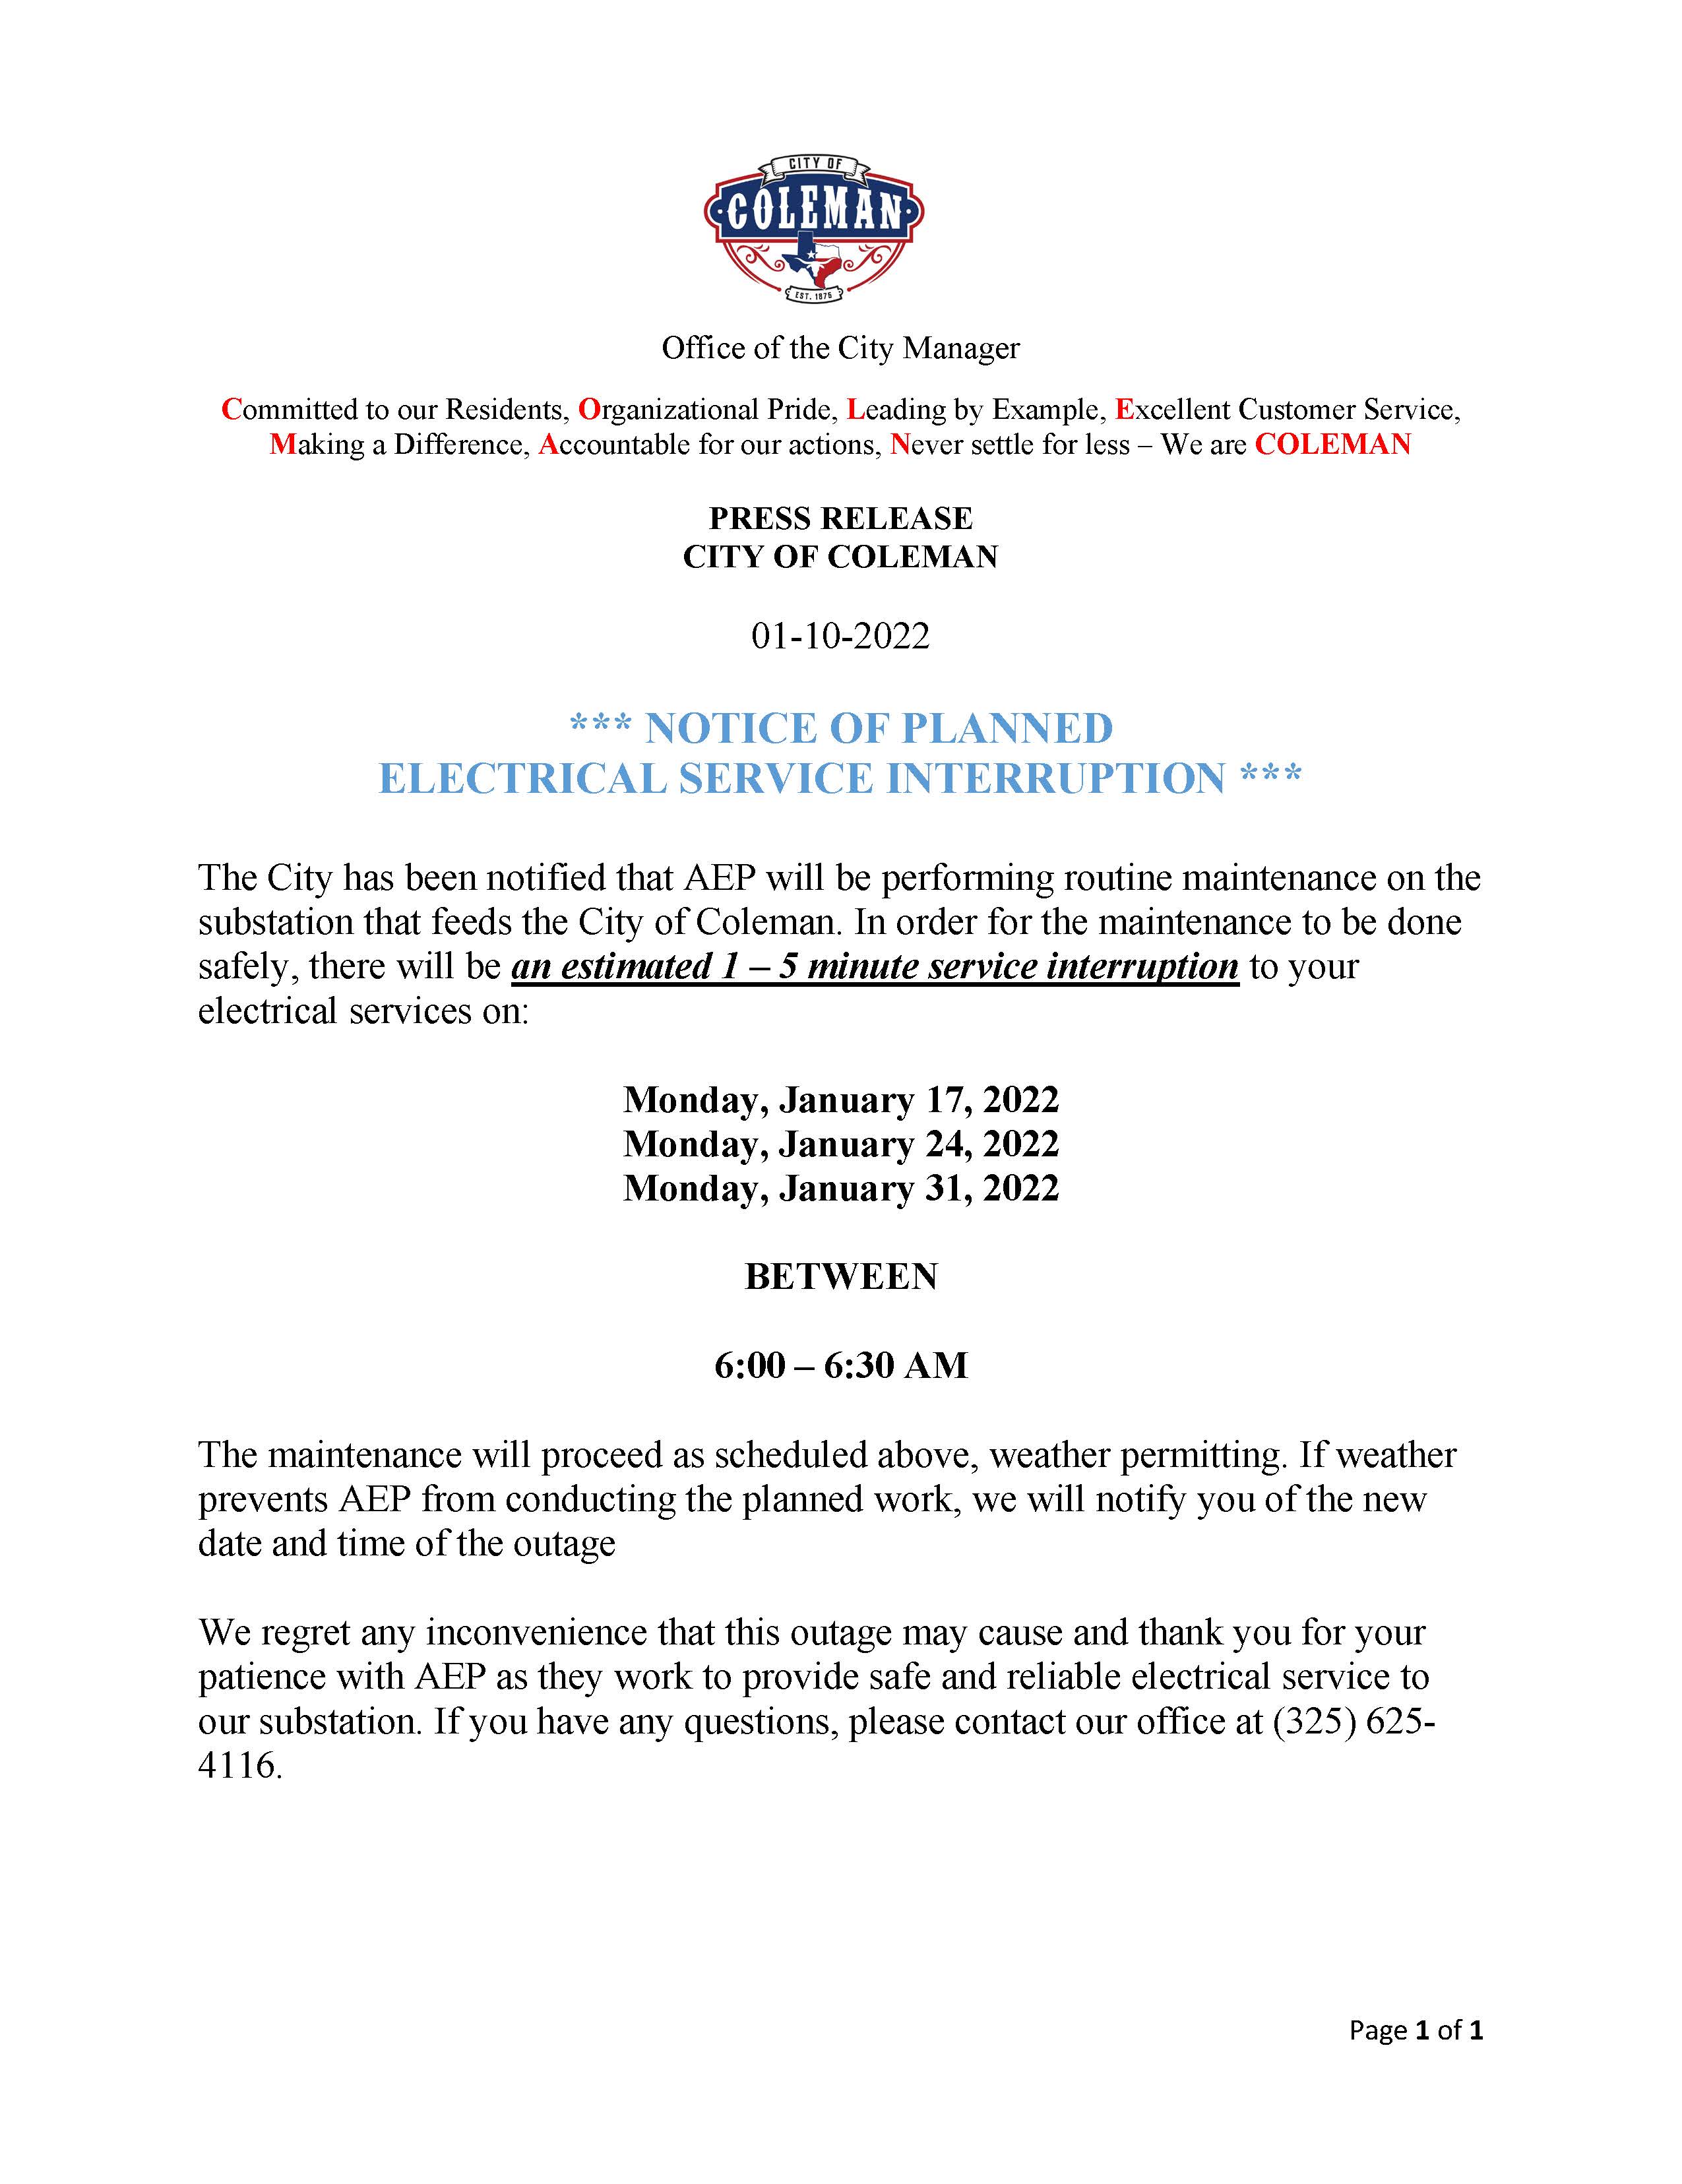 Notice of Planned Electrical Disruption